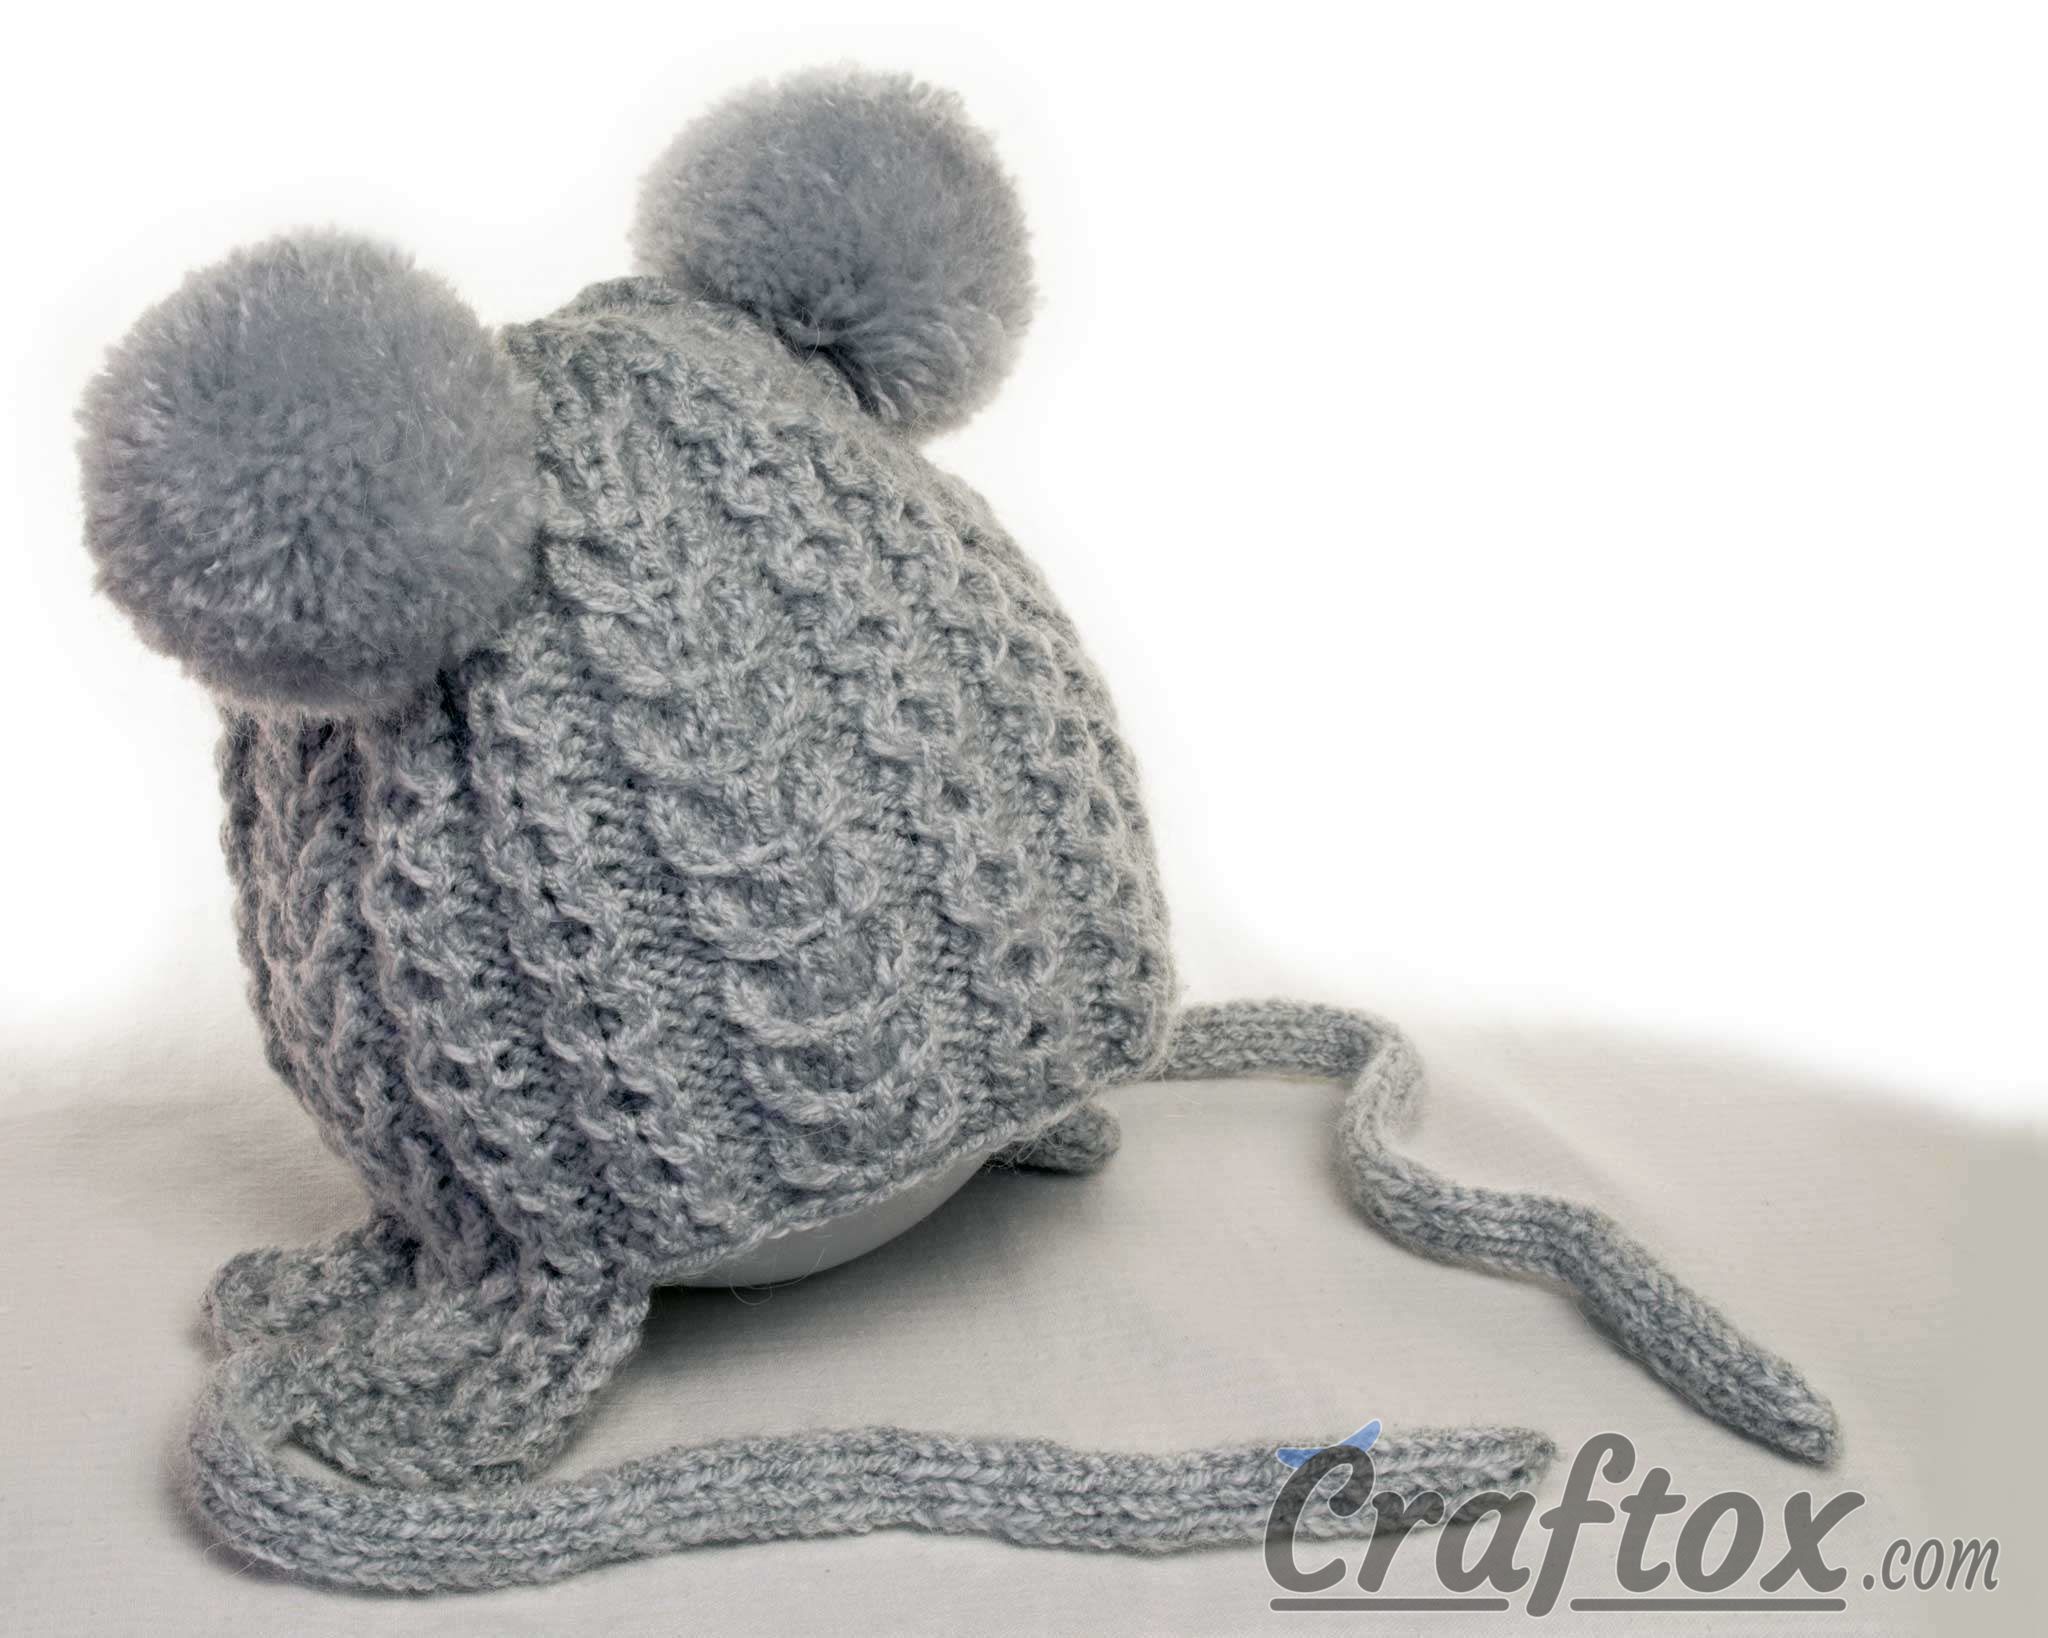 Knitting winter hat with pom poms for kid. Free pattern